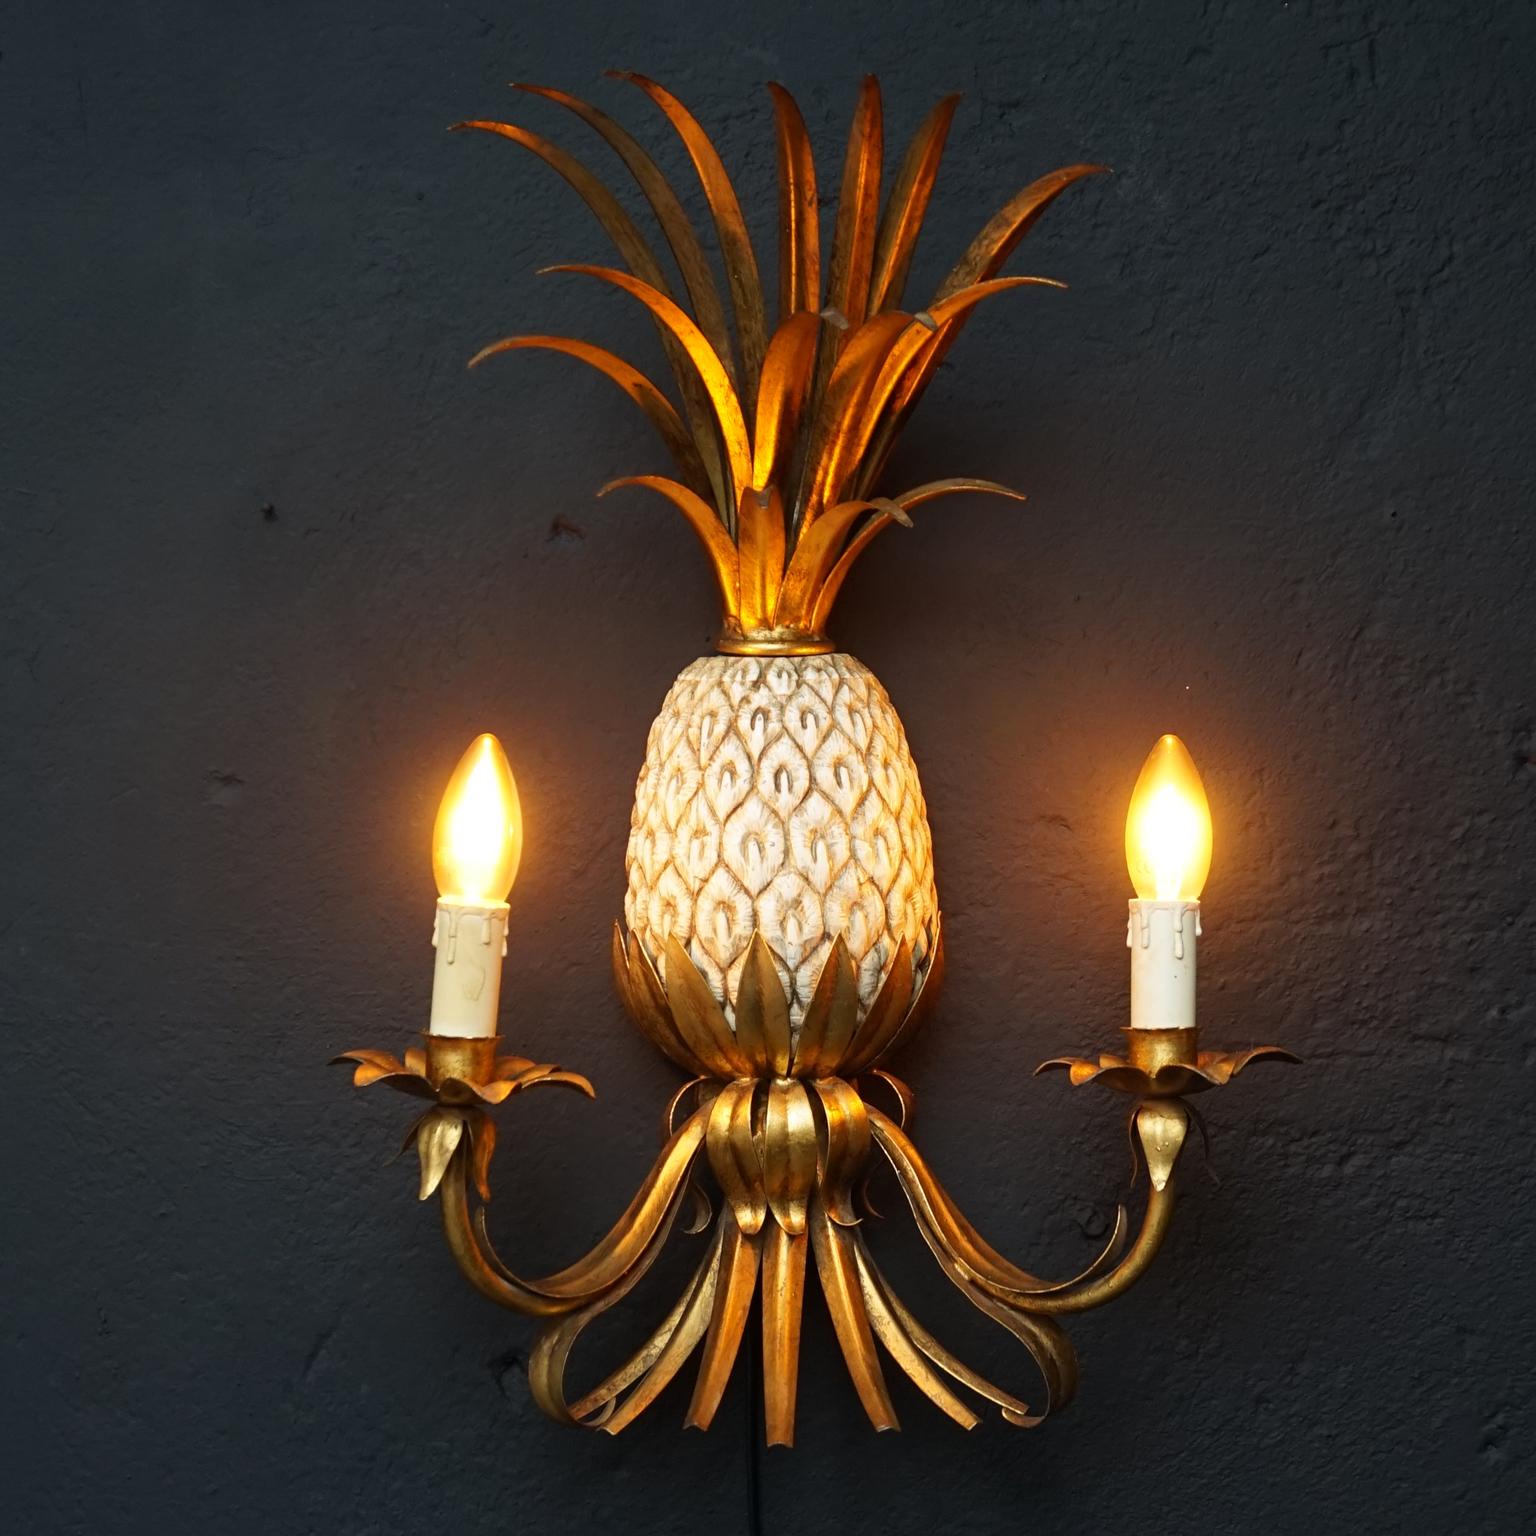 Very unique vintage Hollywood Regency style Pineapple wall light.
The pineapple part is made of withe ceramic, furthermore the lamp has gold colored metal leaves and light fixtures.

The Hollywood Regency style is famous for its material